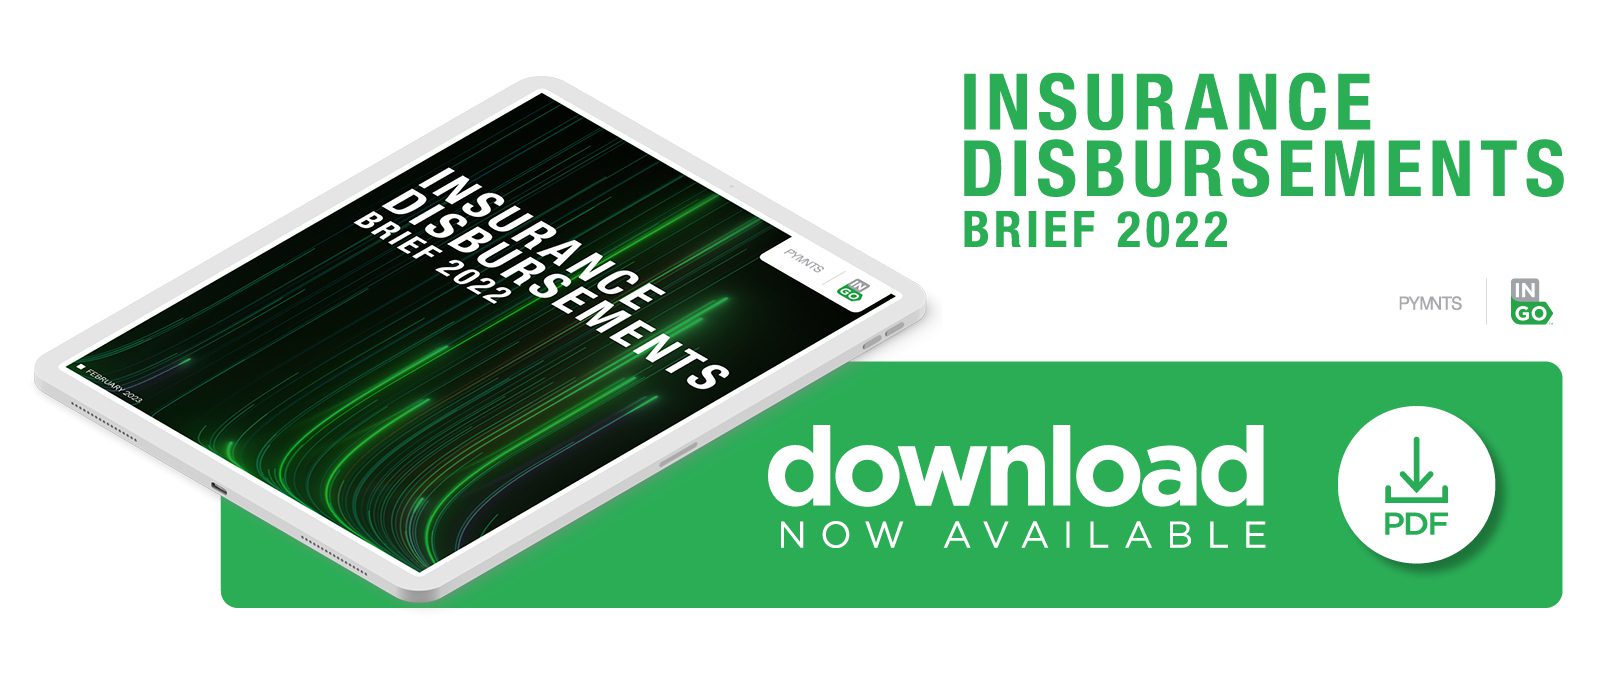 Ingo Money - Insurance Disbursements Brief 2022 – February 2023 – Learn about consumer preferences in receiving insurance claim payouts and how instant payments are in the rise in this industry